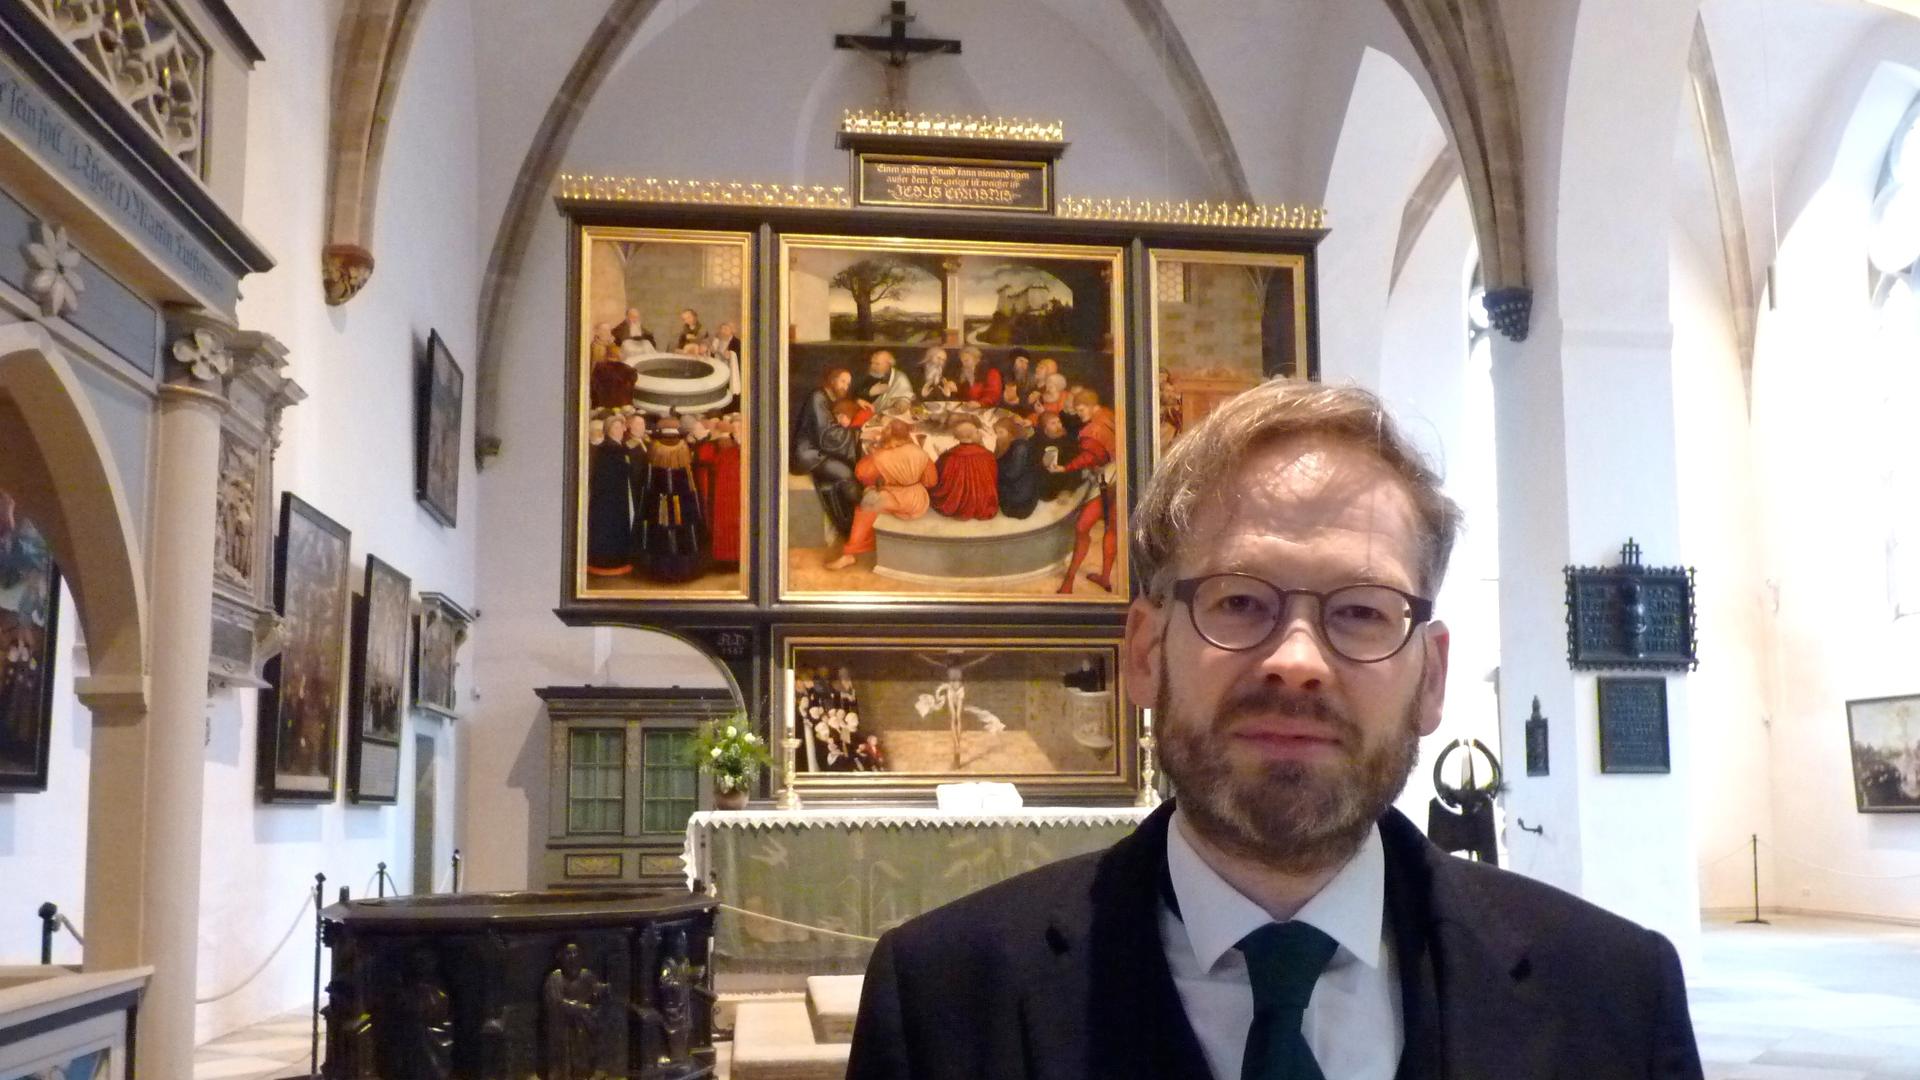 Pastor Johannes Block preaches in Town Church, where Martin Luther preached nearly 500 years ago.